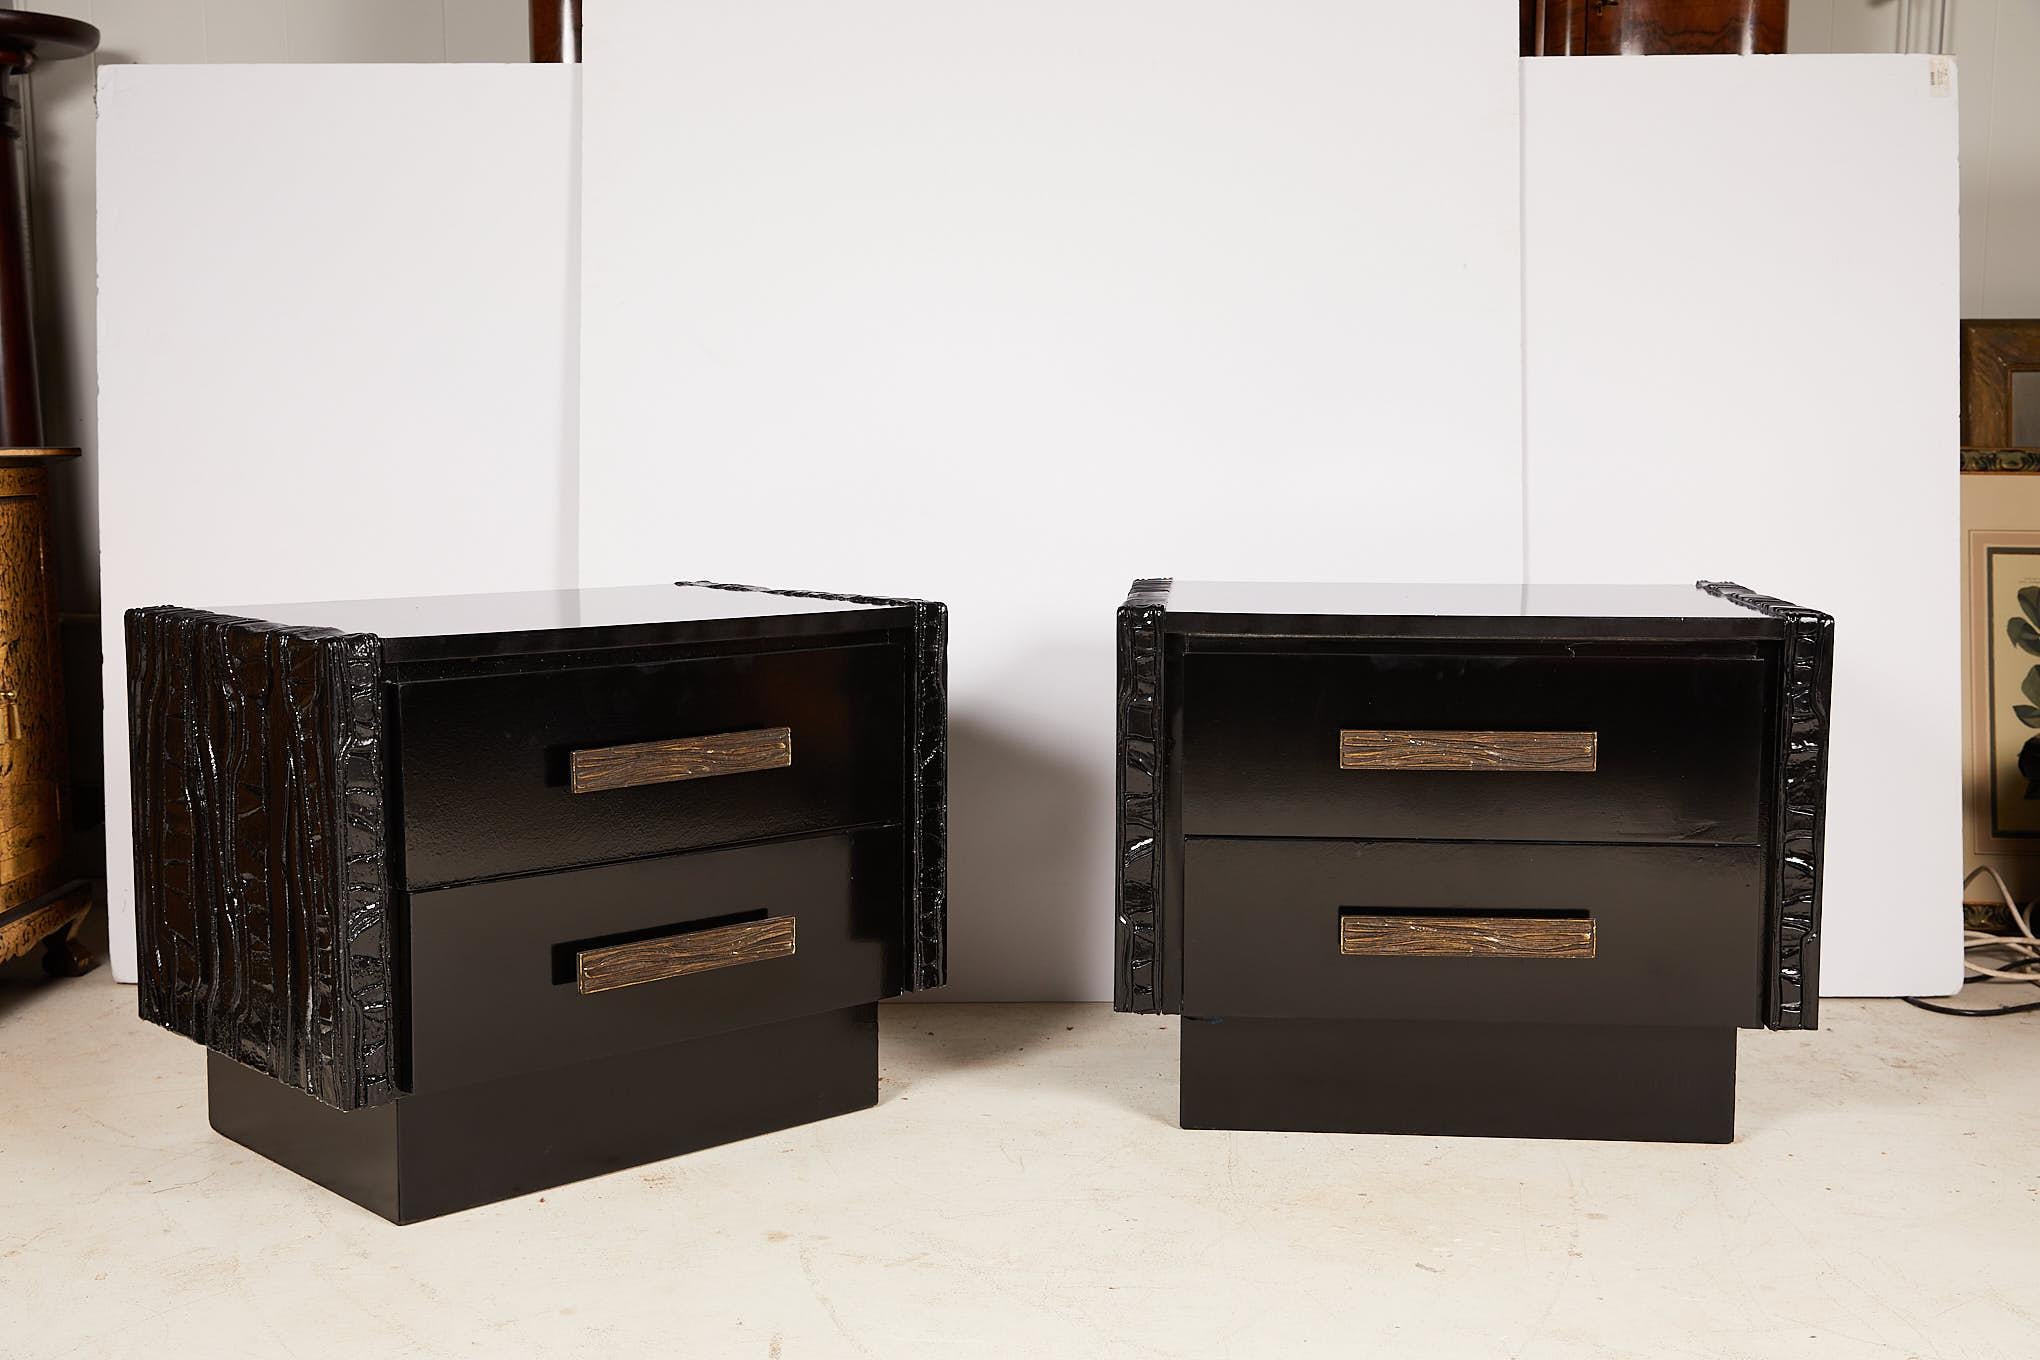 Vintage pair of midcentury nightstands or end tables with heavy brutalist carvings on each side flanking a case holding two drawers with heavy bronze cast hardware and raised on a plinth base. The tables are made of walnut and have a black lacquer